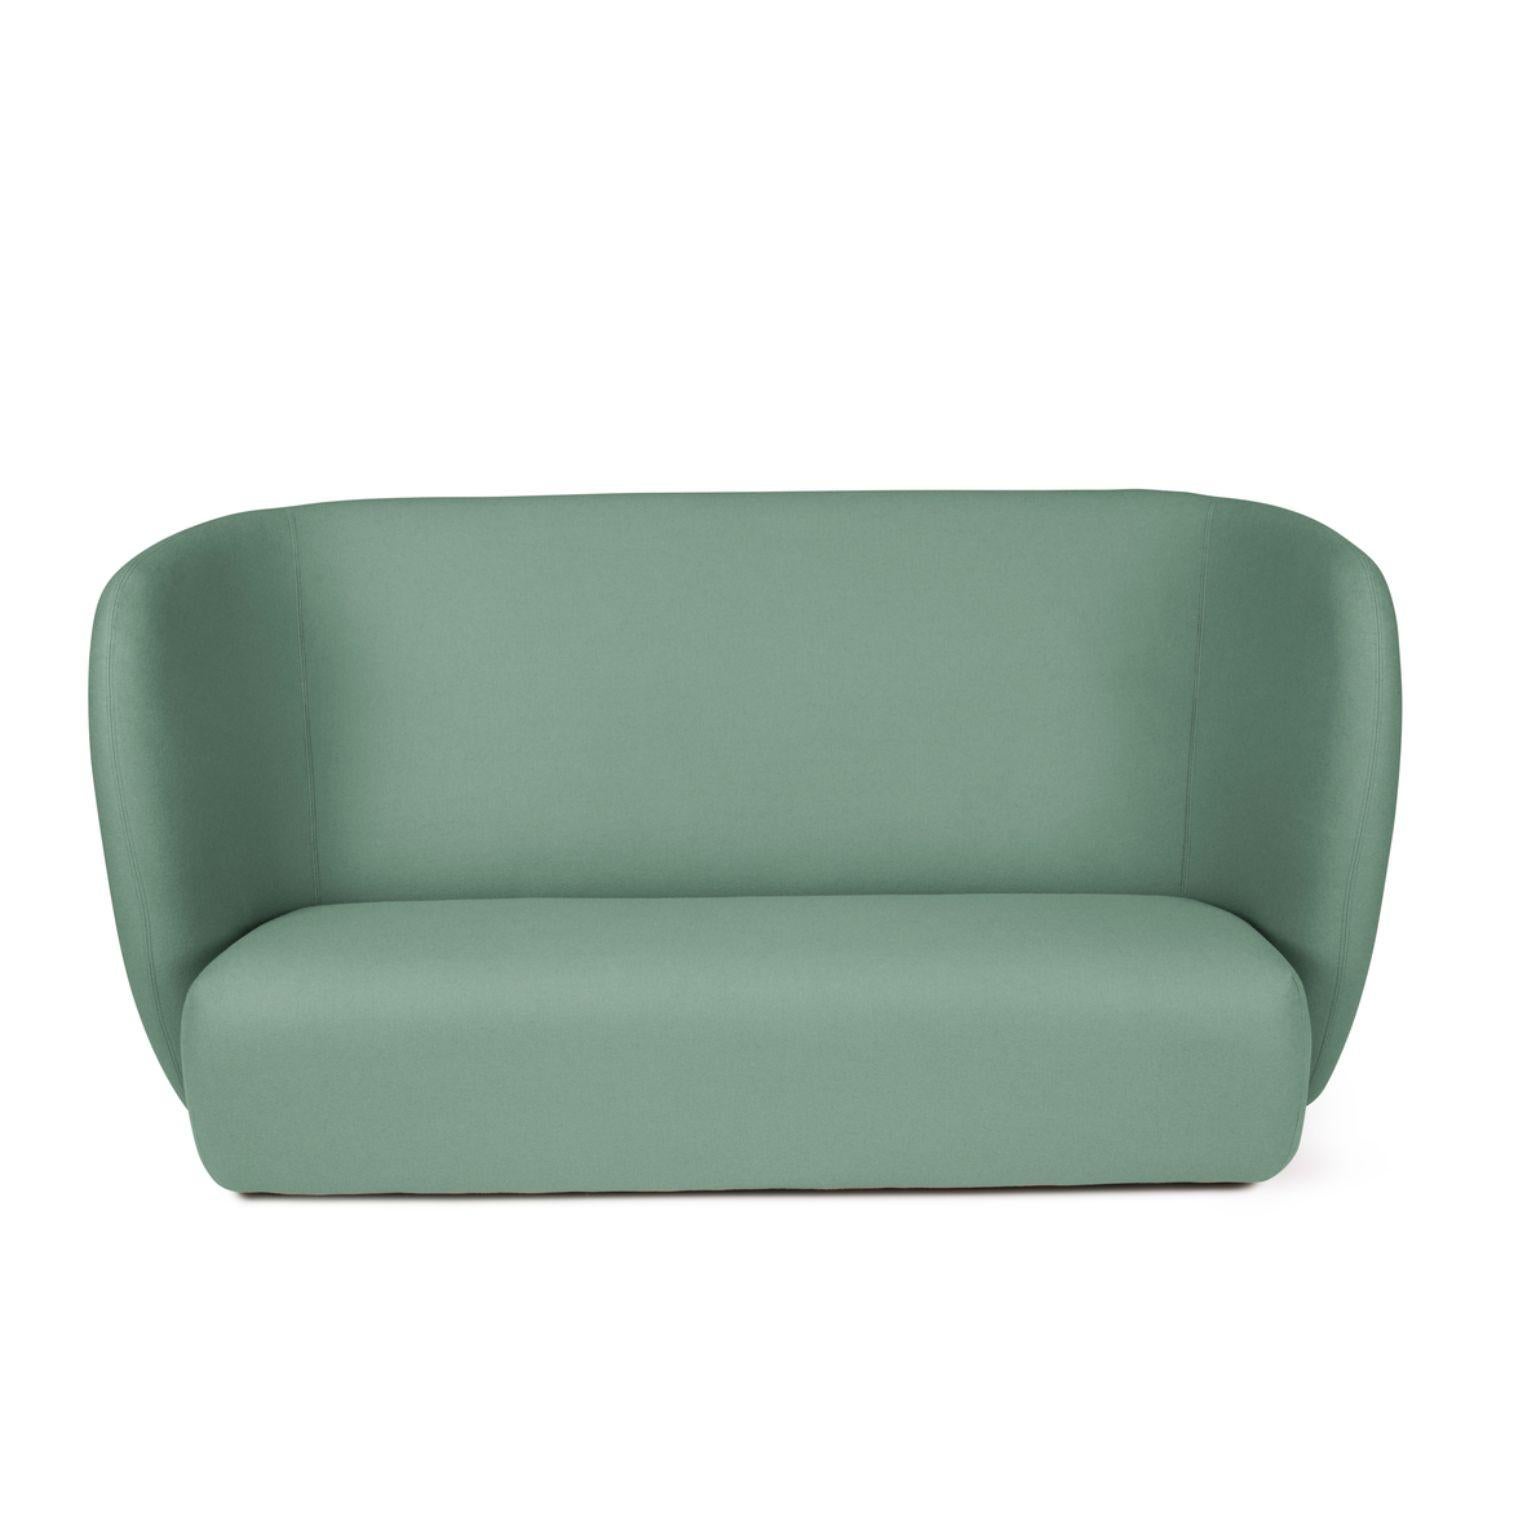 Haven 3 seater jade by Warm Nordic
Dimensions: D 220 x W 84 x H 110/40 cm
Material: Textile upholstery, foam, spring system, wood
Weight: 84 kg
Also available in different colours and finishes.

Haven is a contemporary sofa with a simple, soft